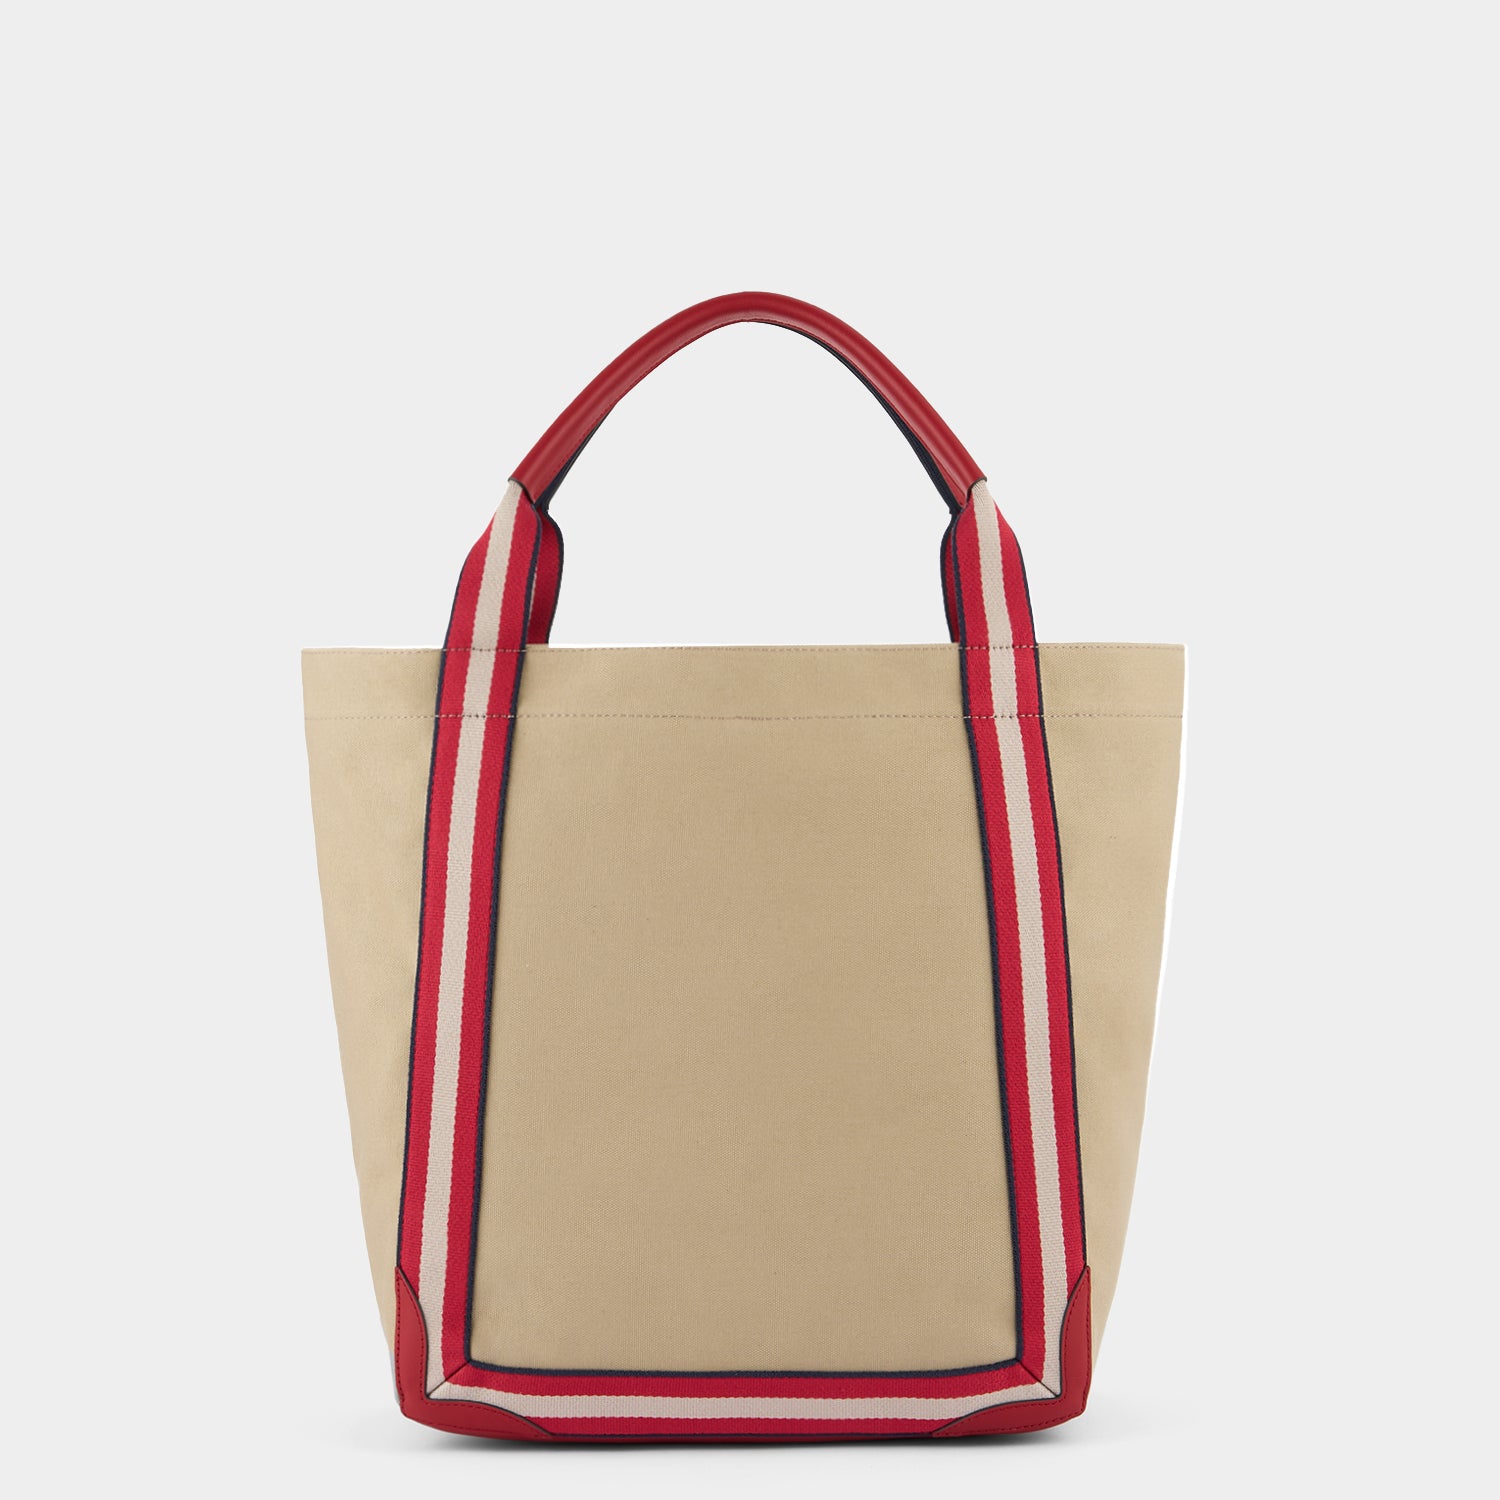 Bespoke Walton Large Tote -

                  
                    Circus Leather in Red -
                  

                  Anya Hindmarch UK
